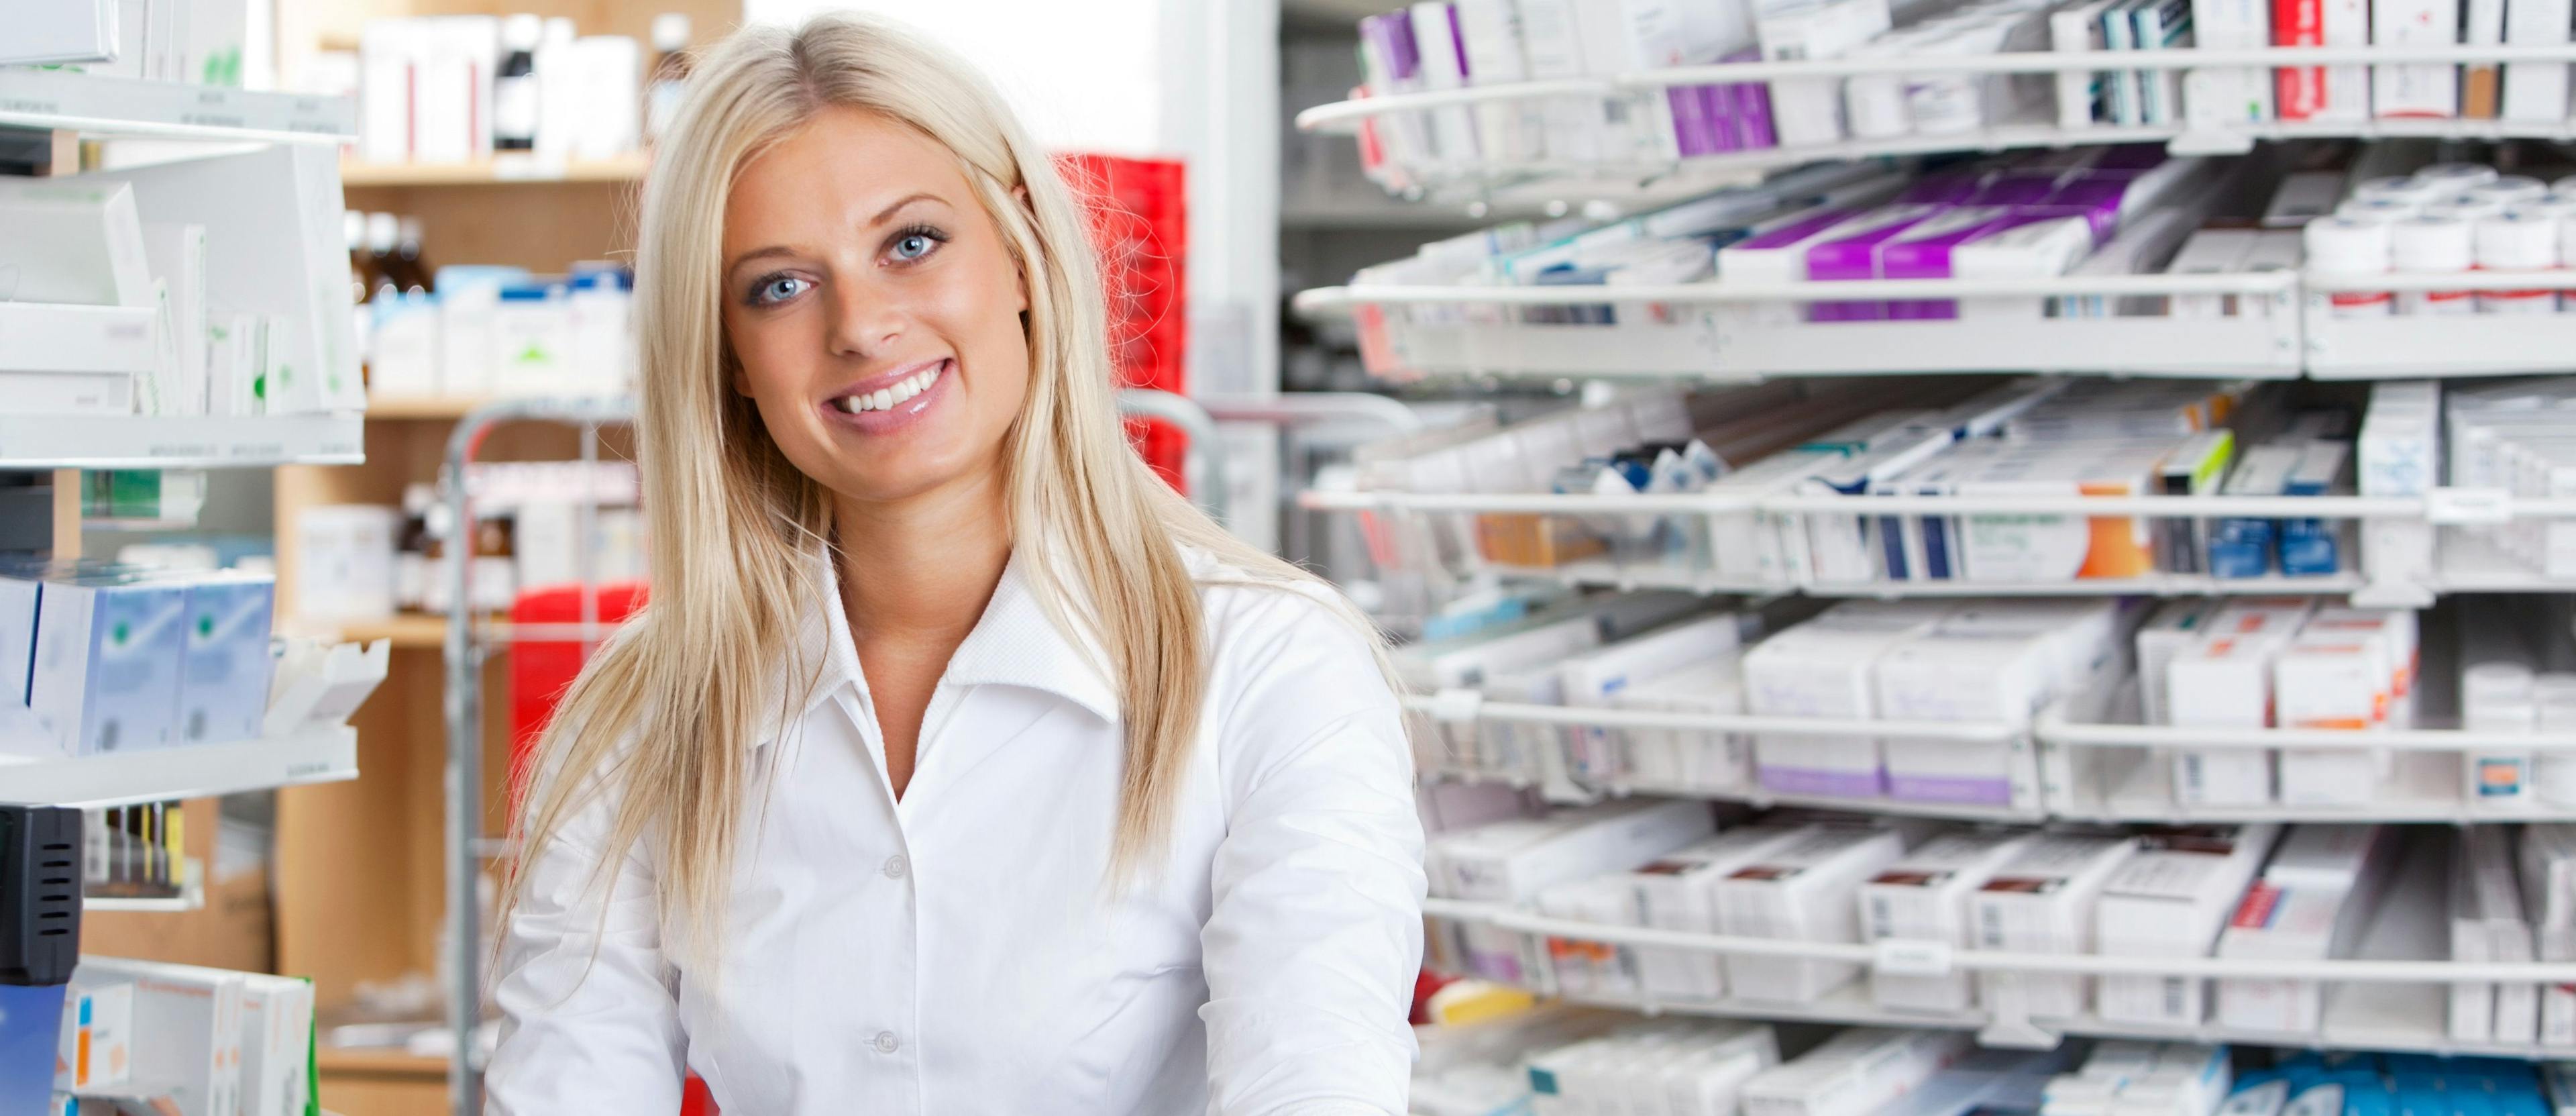 A Trifecta of Threats (and Opportunities) Set to Become Mainstream in Pharmacy